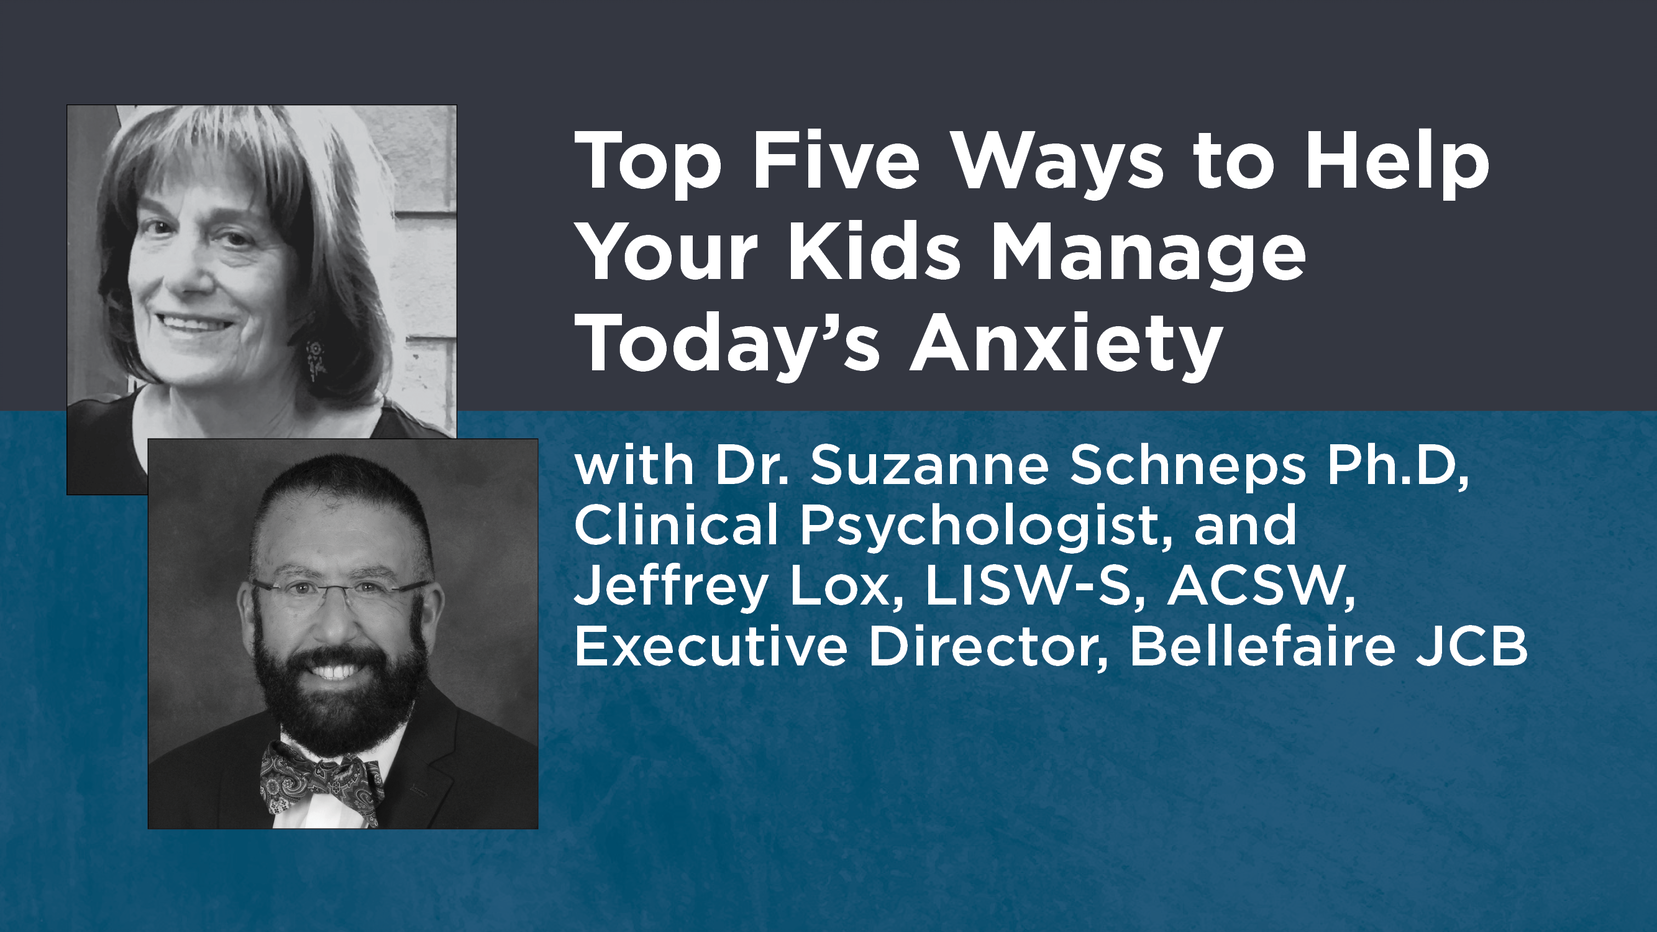 Top Five Ways to Help Your Kids Manage Today’s Anxiety